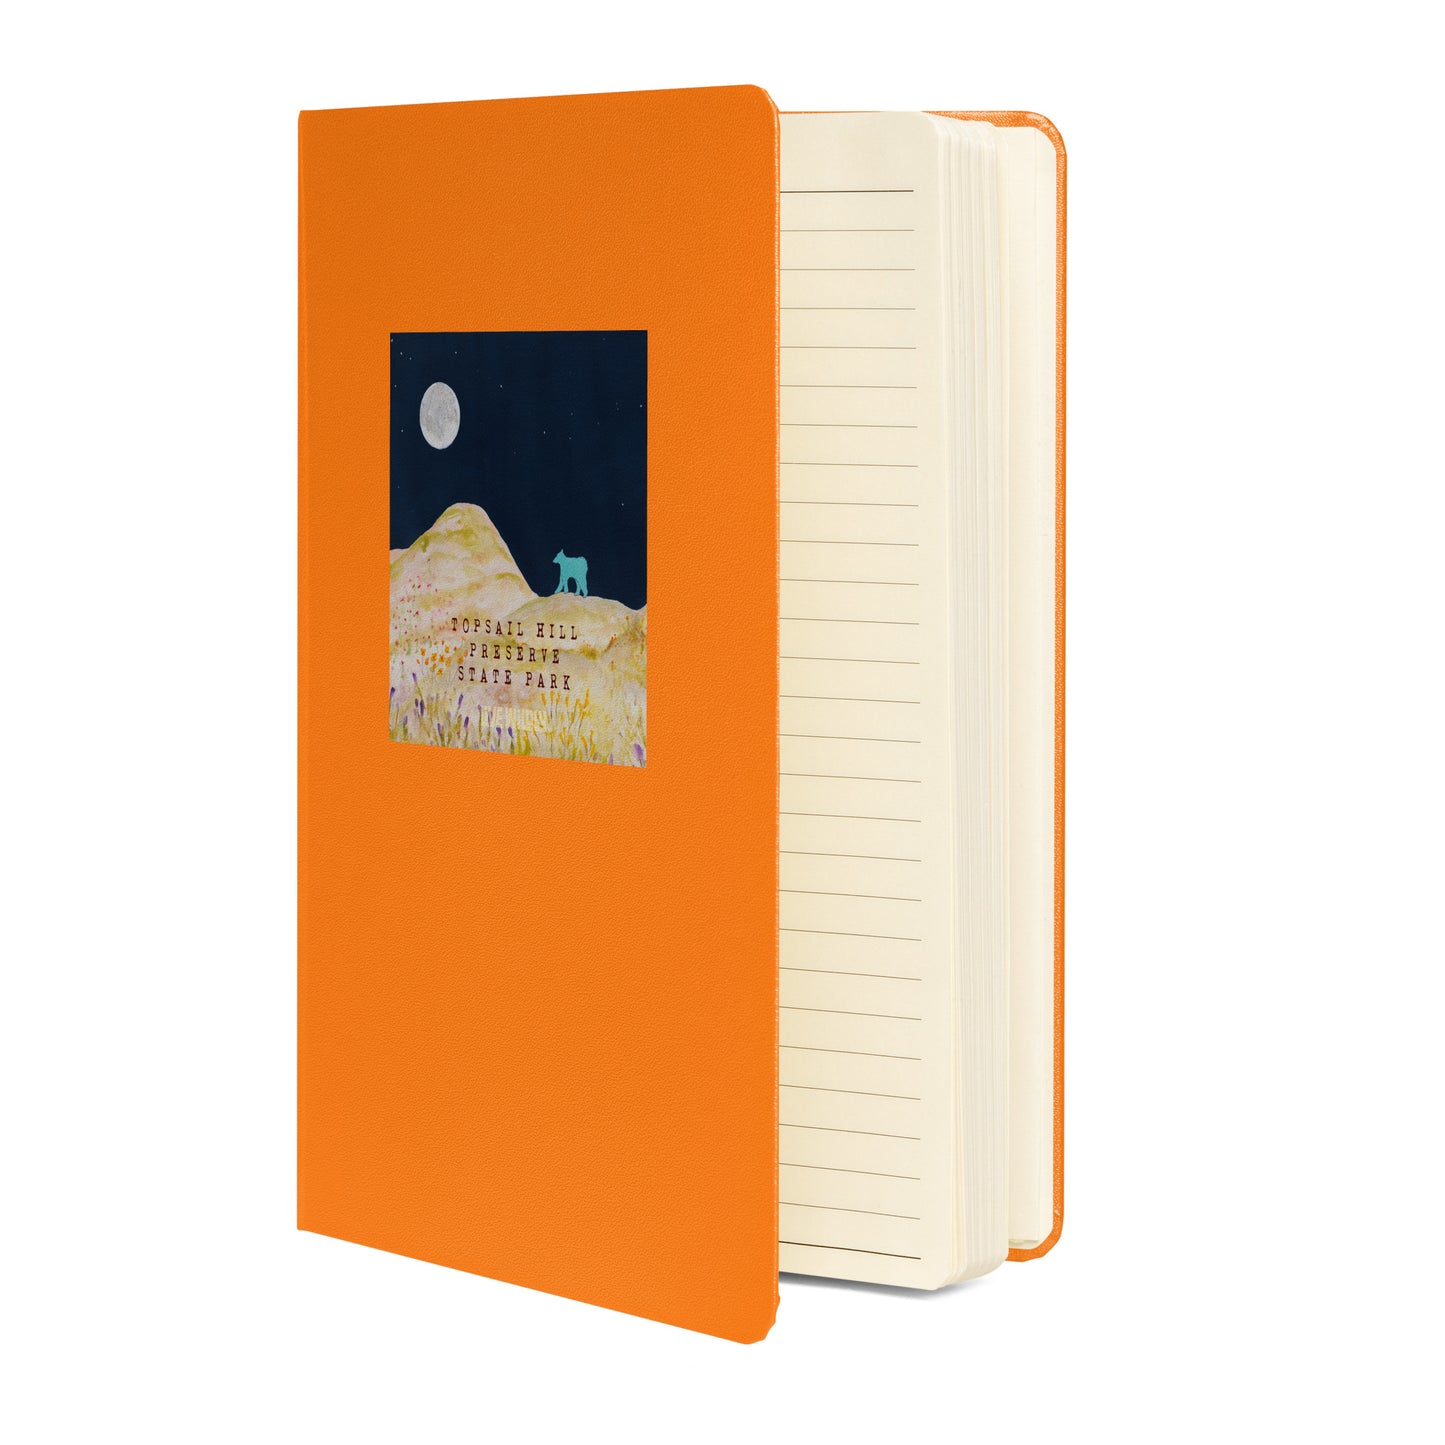 Topsail Preserve Hardcover Notebook by Deborah Mitchell - Live Wildly 